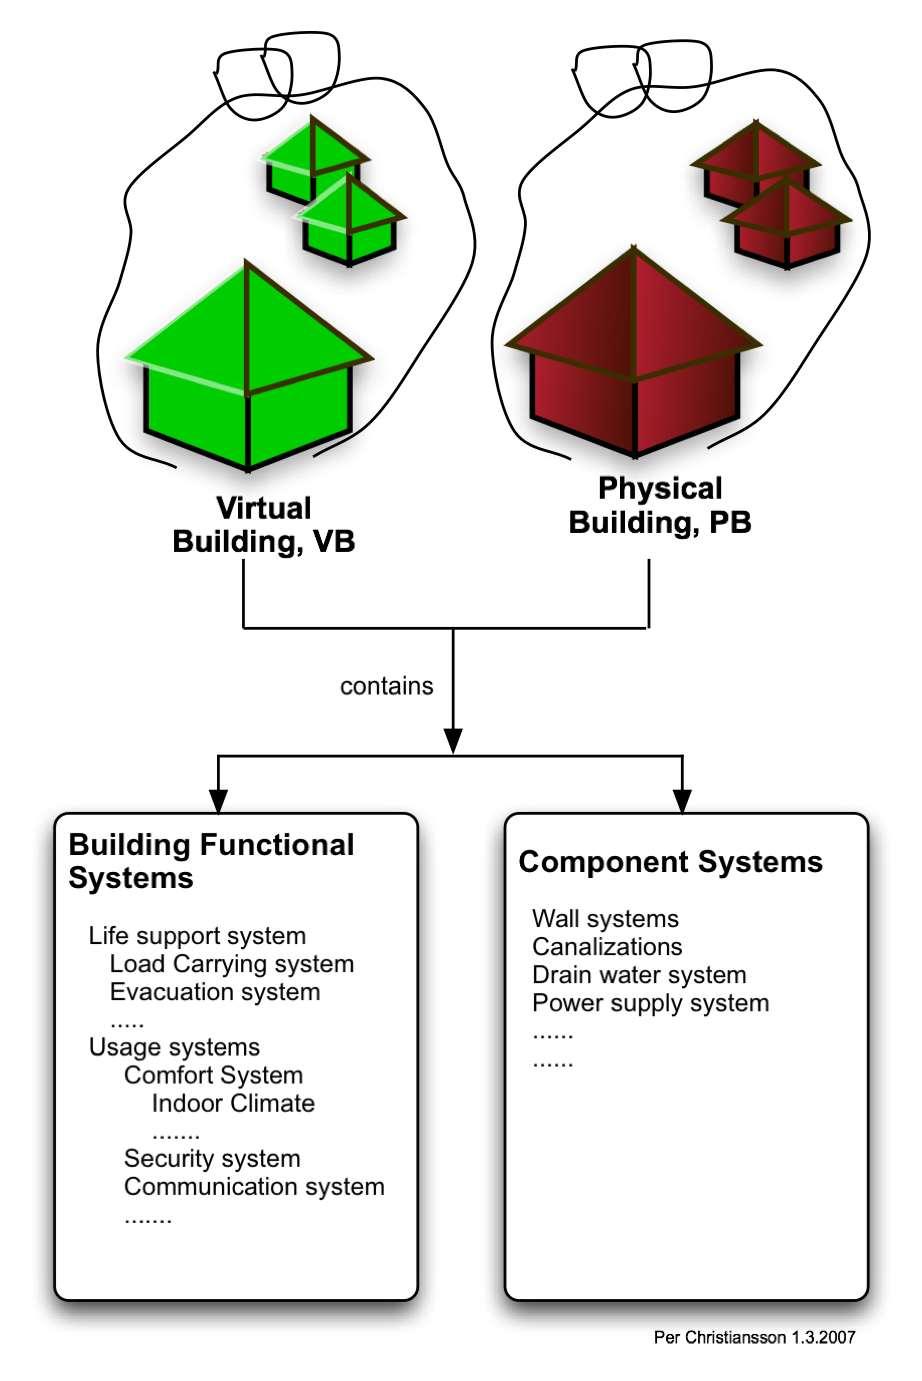 Needs and requirements formulation from end users leads to specific requirements on the building functional systems and their implementation as a physical building.